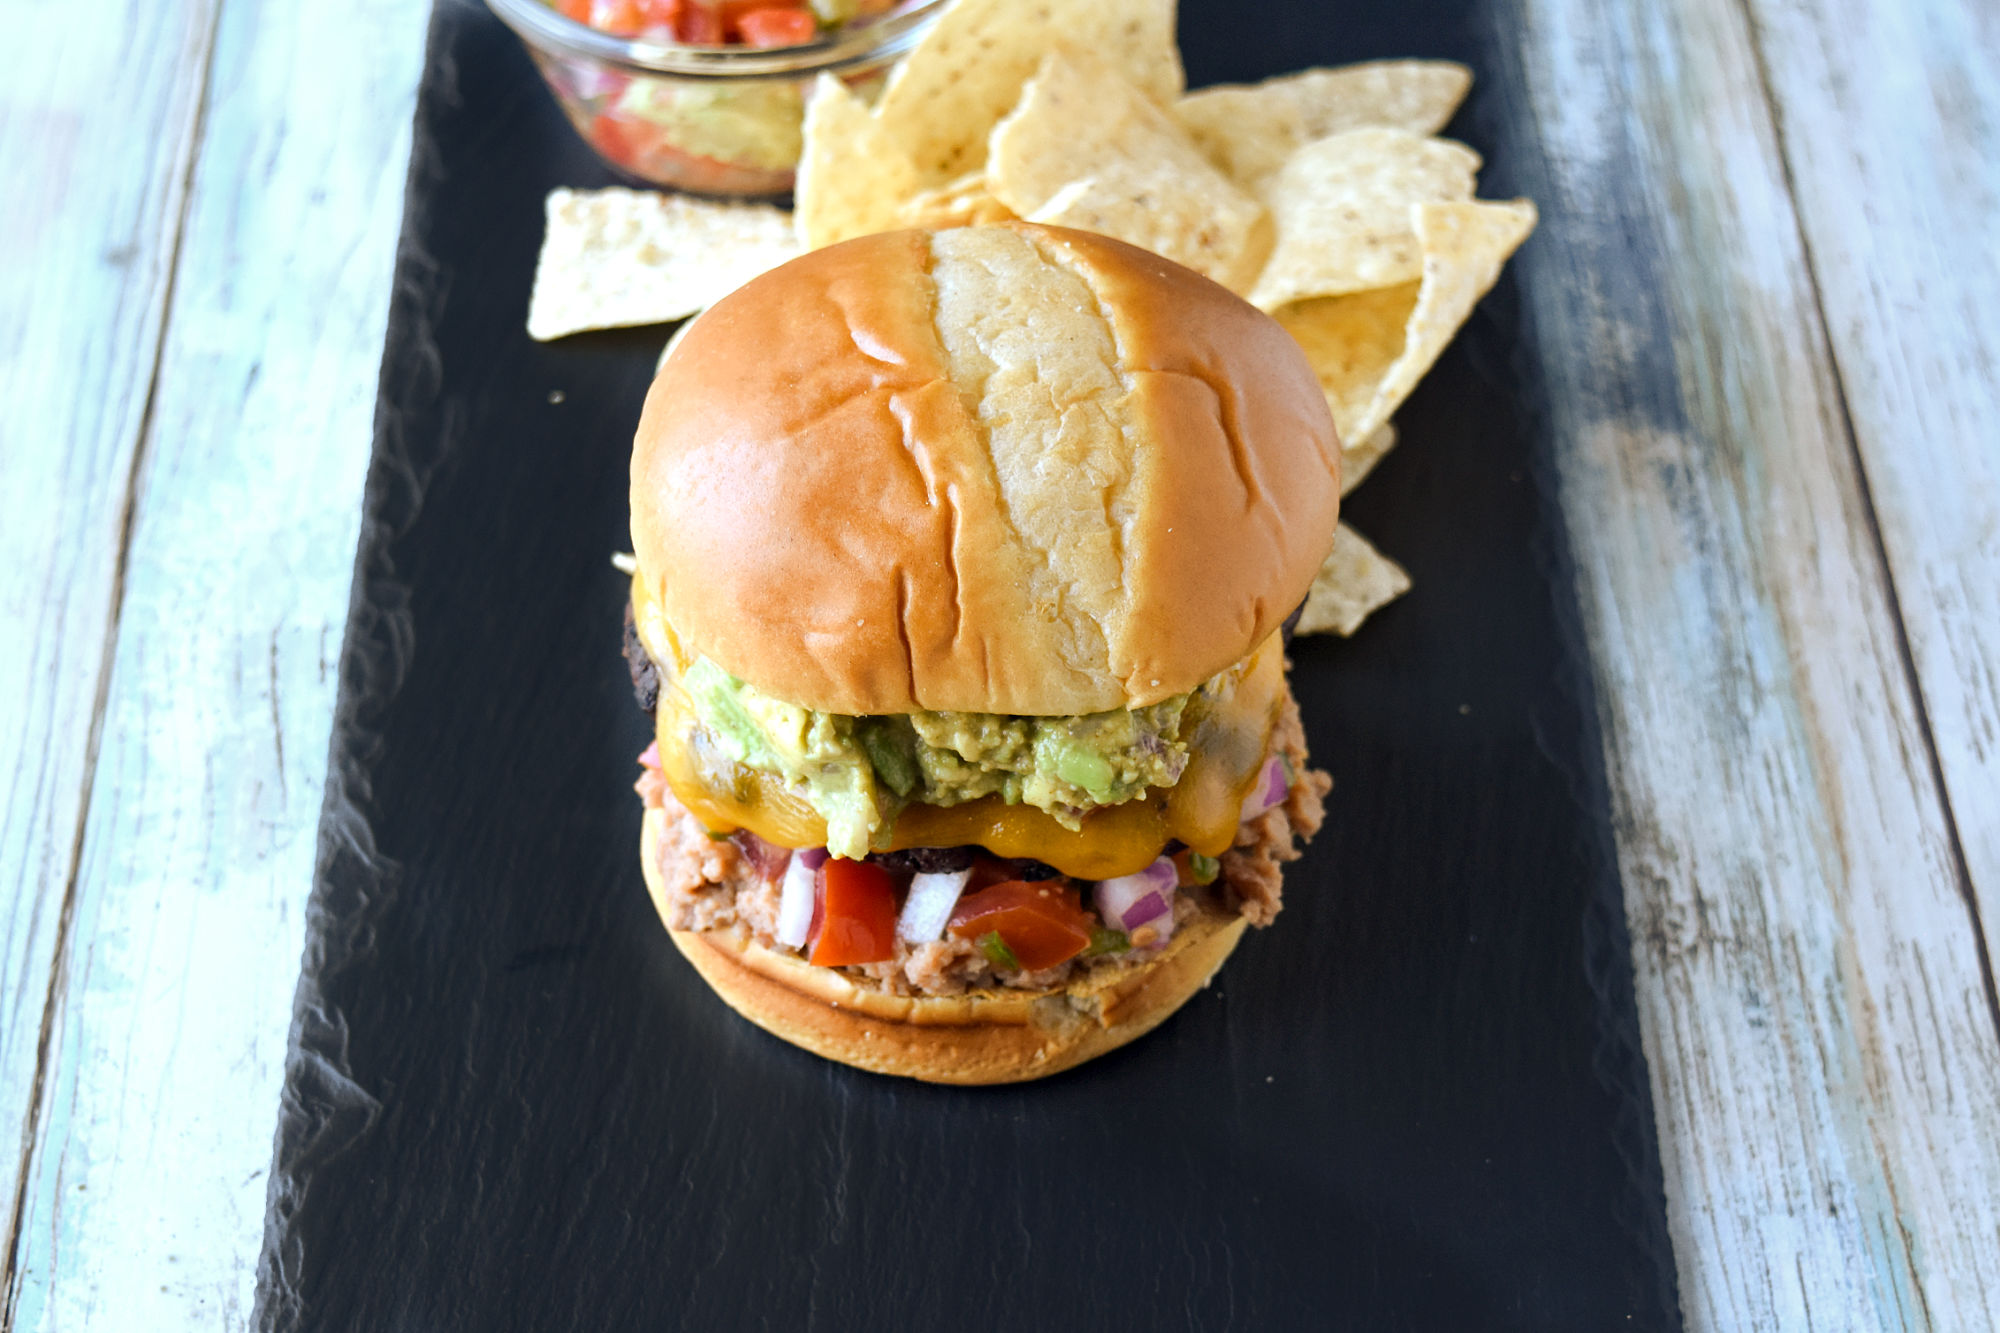 The Chalupa Burger layers a taco seasoned burger with a tostada, pico de gallo, Cheddar cheese, and guacamole.  It’s the ultimate in Latin inspired hamburgers. #BurgerMonth